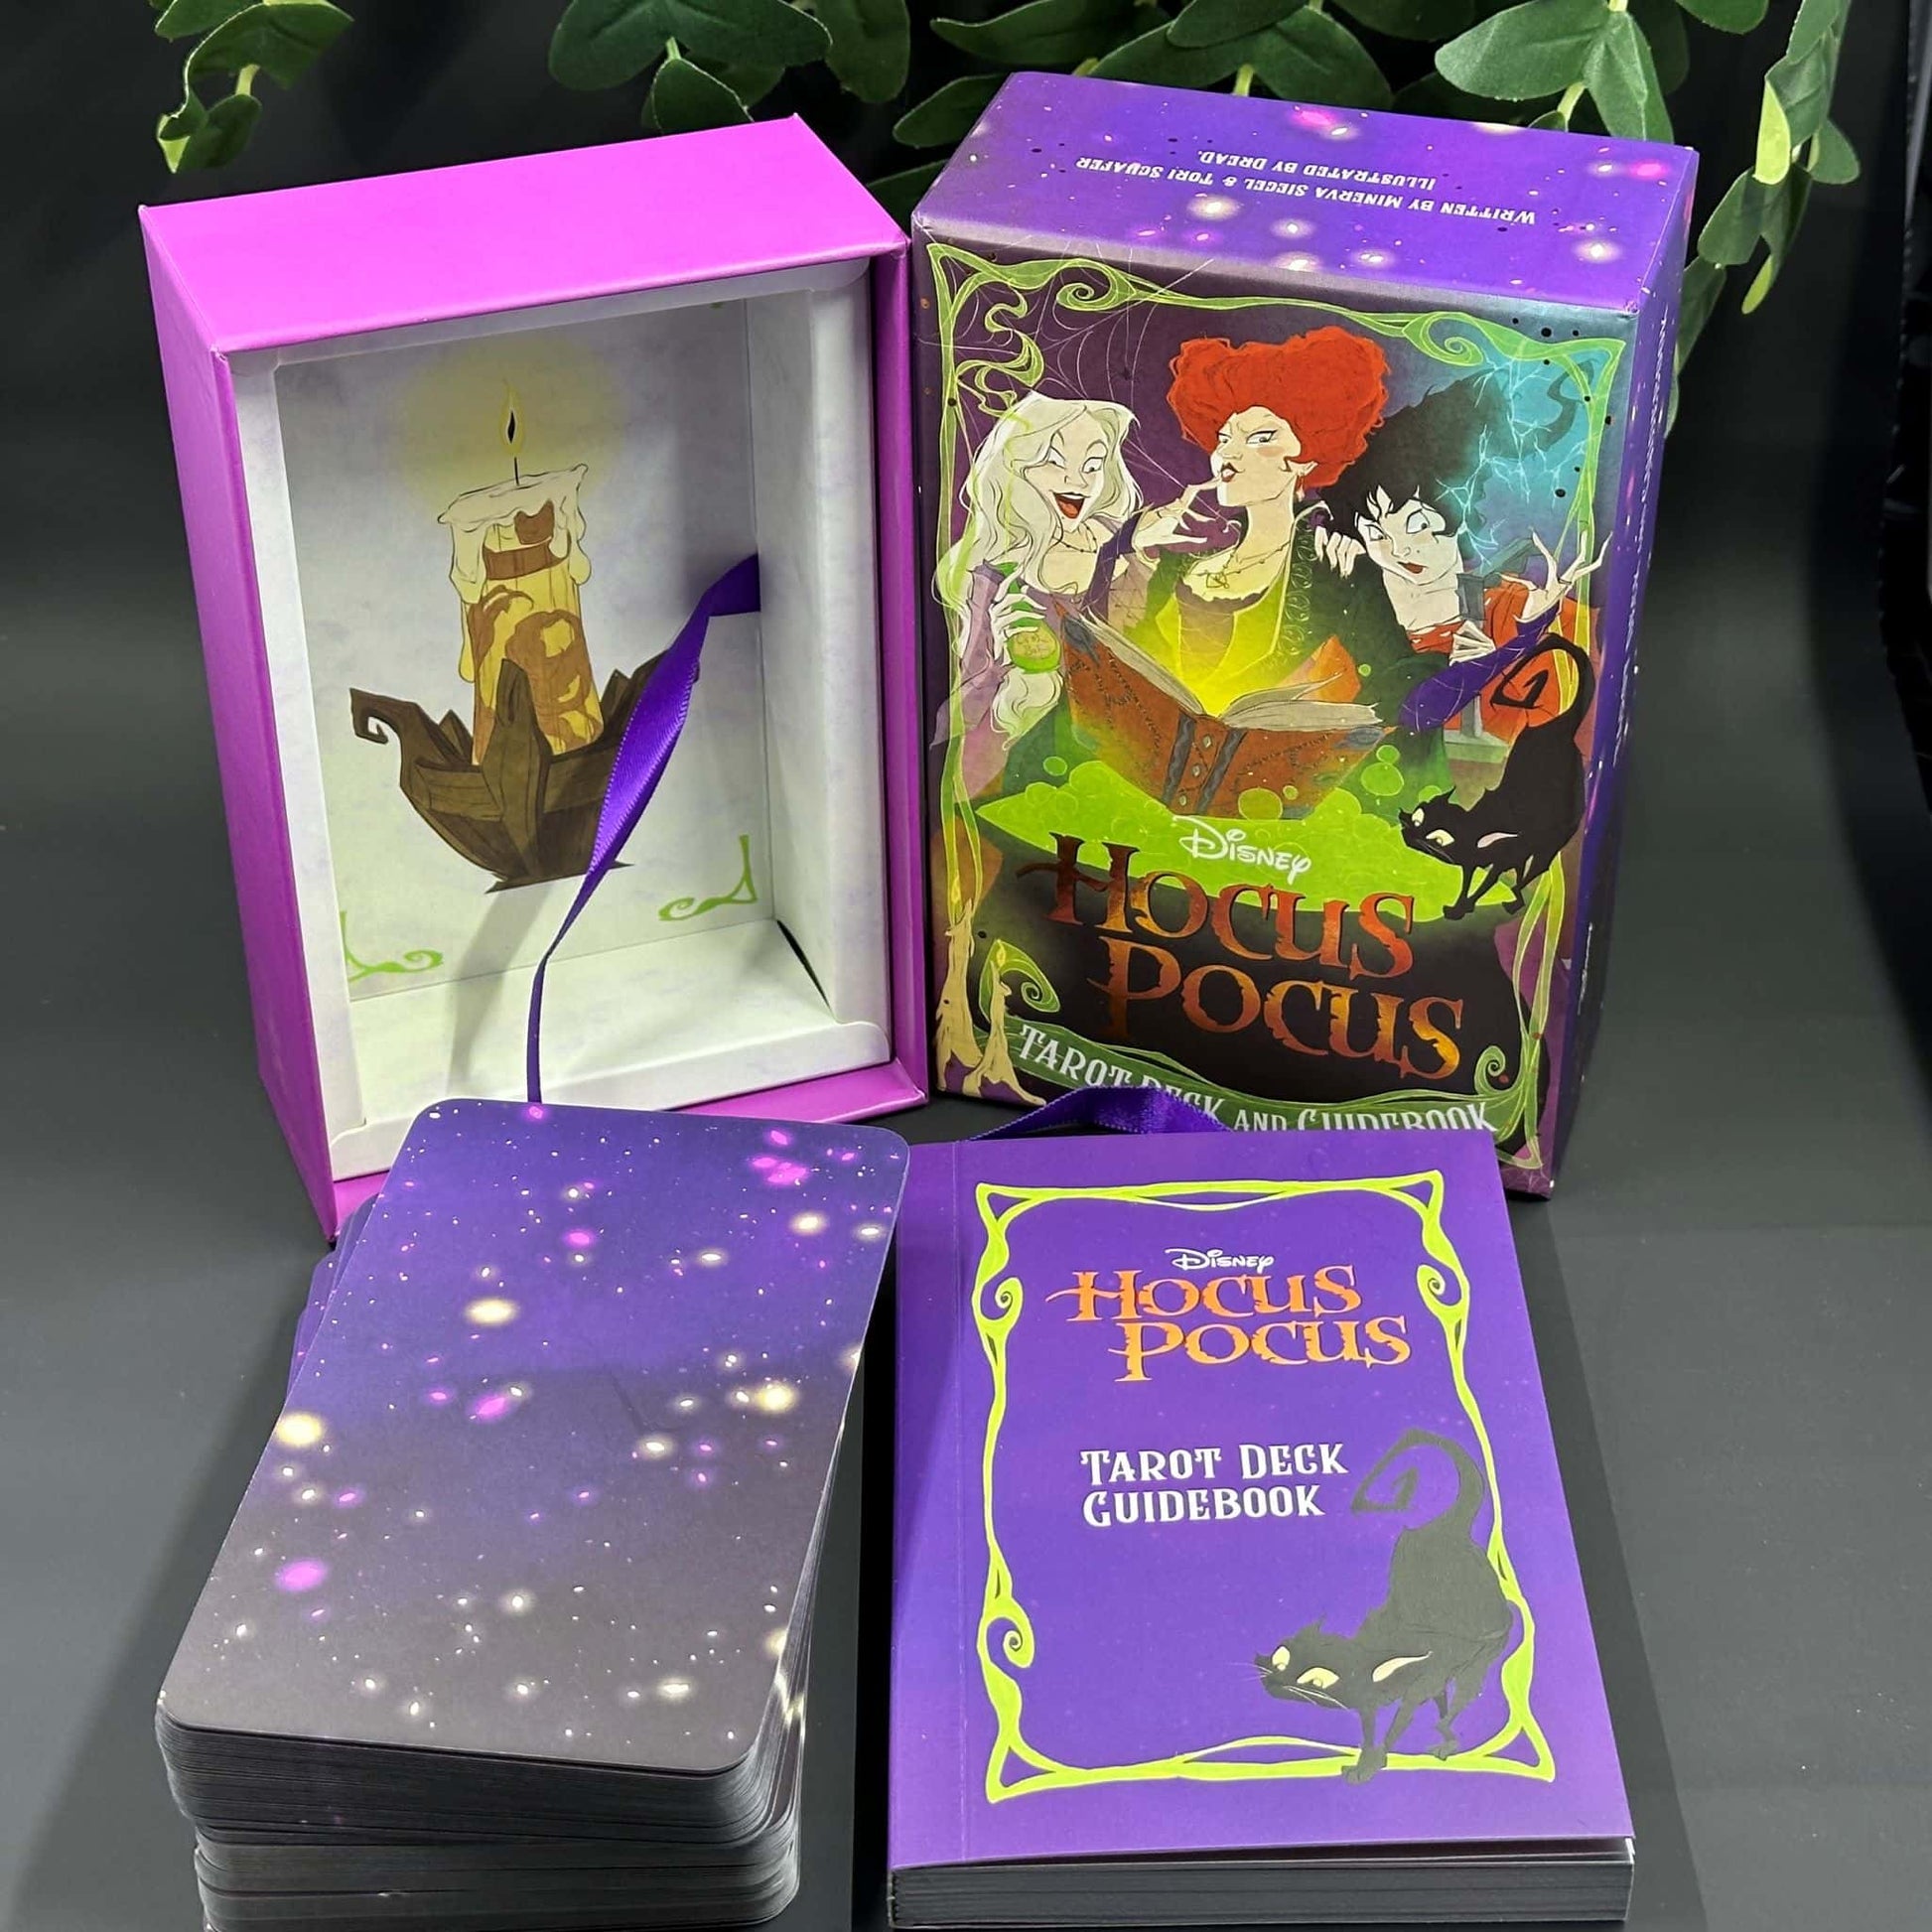 Disney's Hocus Pocus Tarot Deck & Guidebook, written by Minerva Siegel and Tori Schafer, Illustrated by Dread - Itsy's Crystal Cove LLC